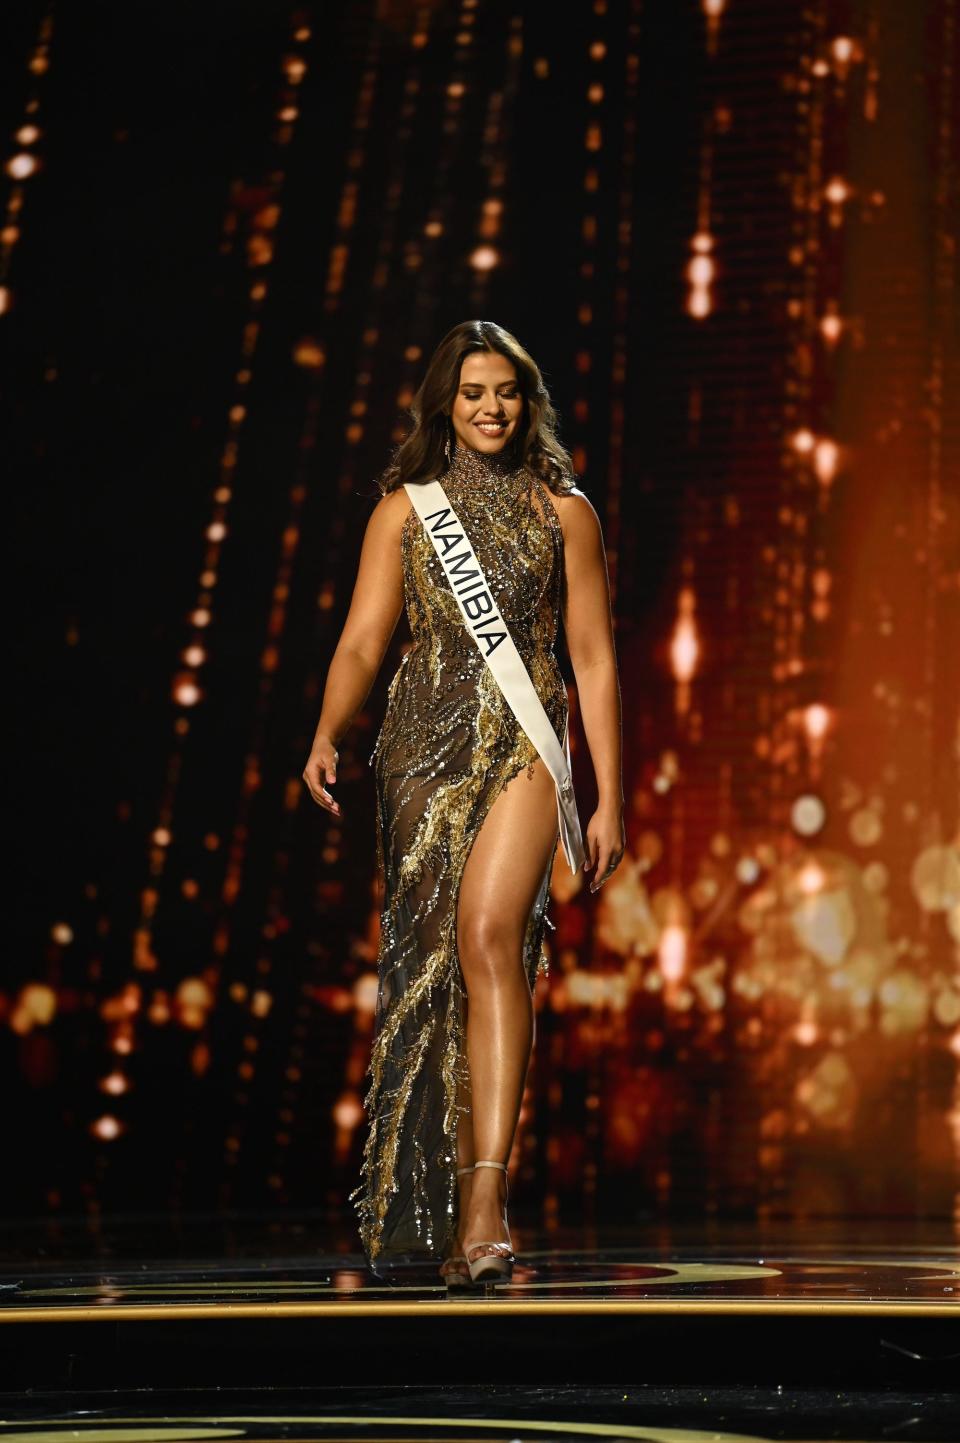 Miss Namibia competes in the 71st annual Miss Universe pageant.